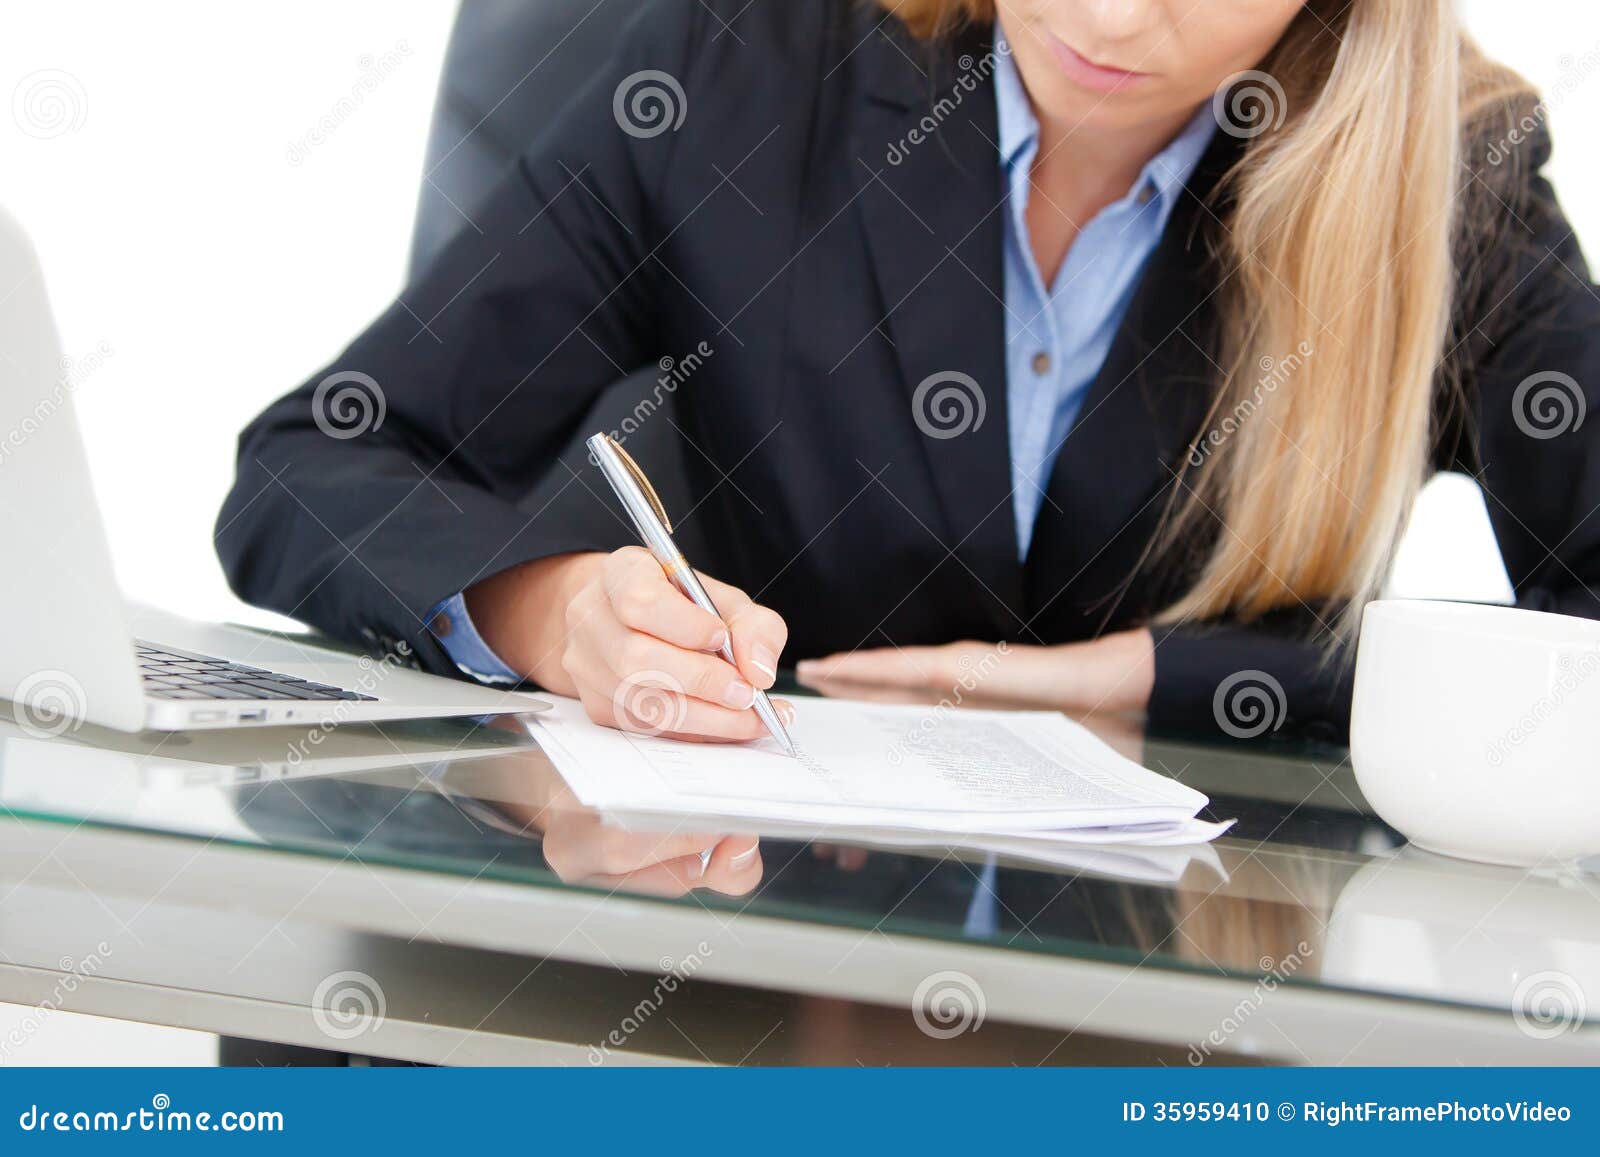 young professional business woman working at desk